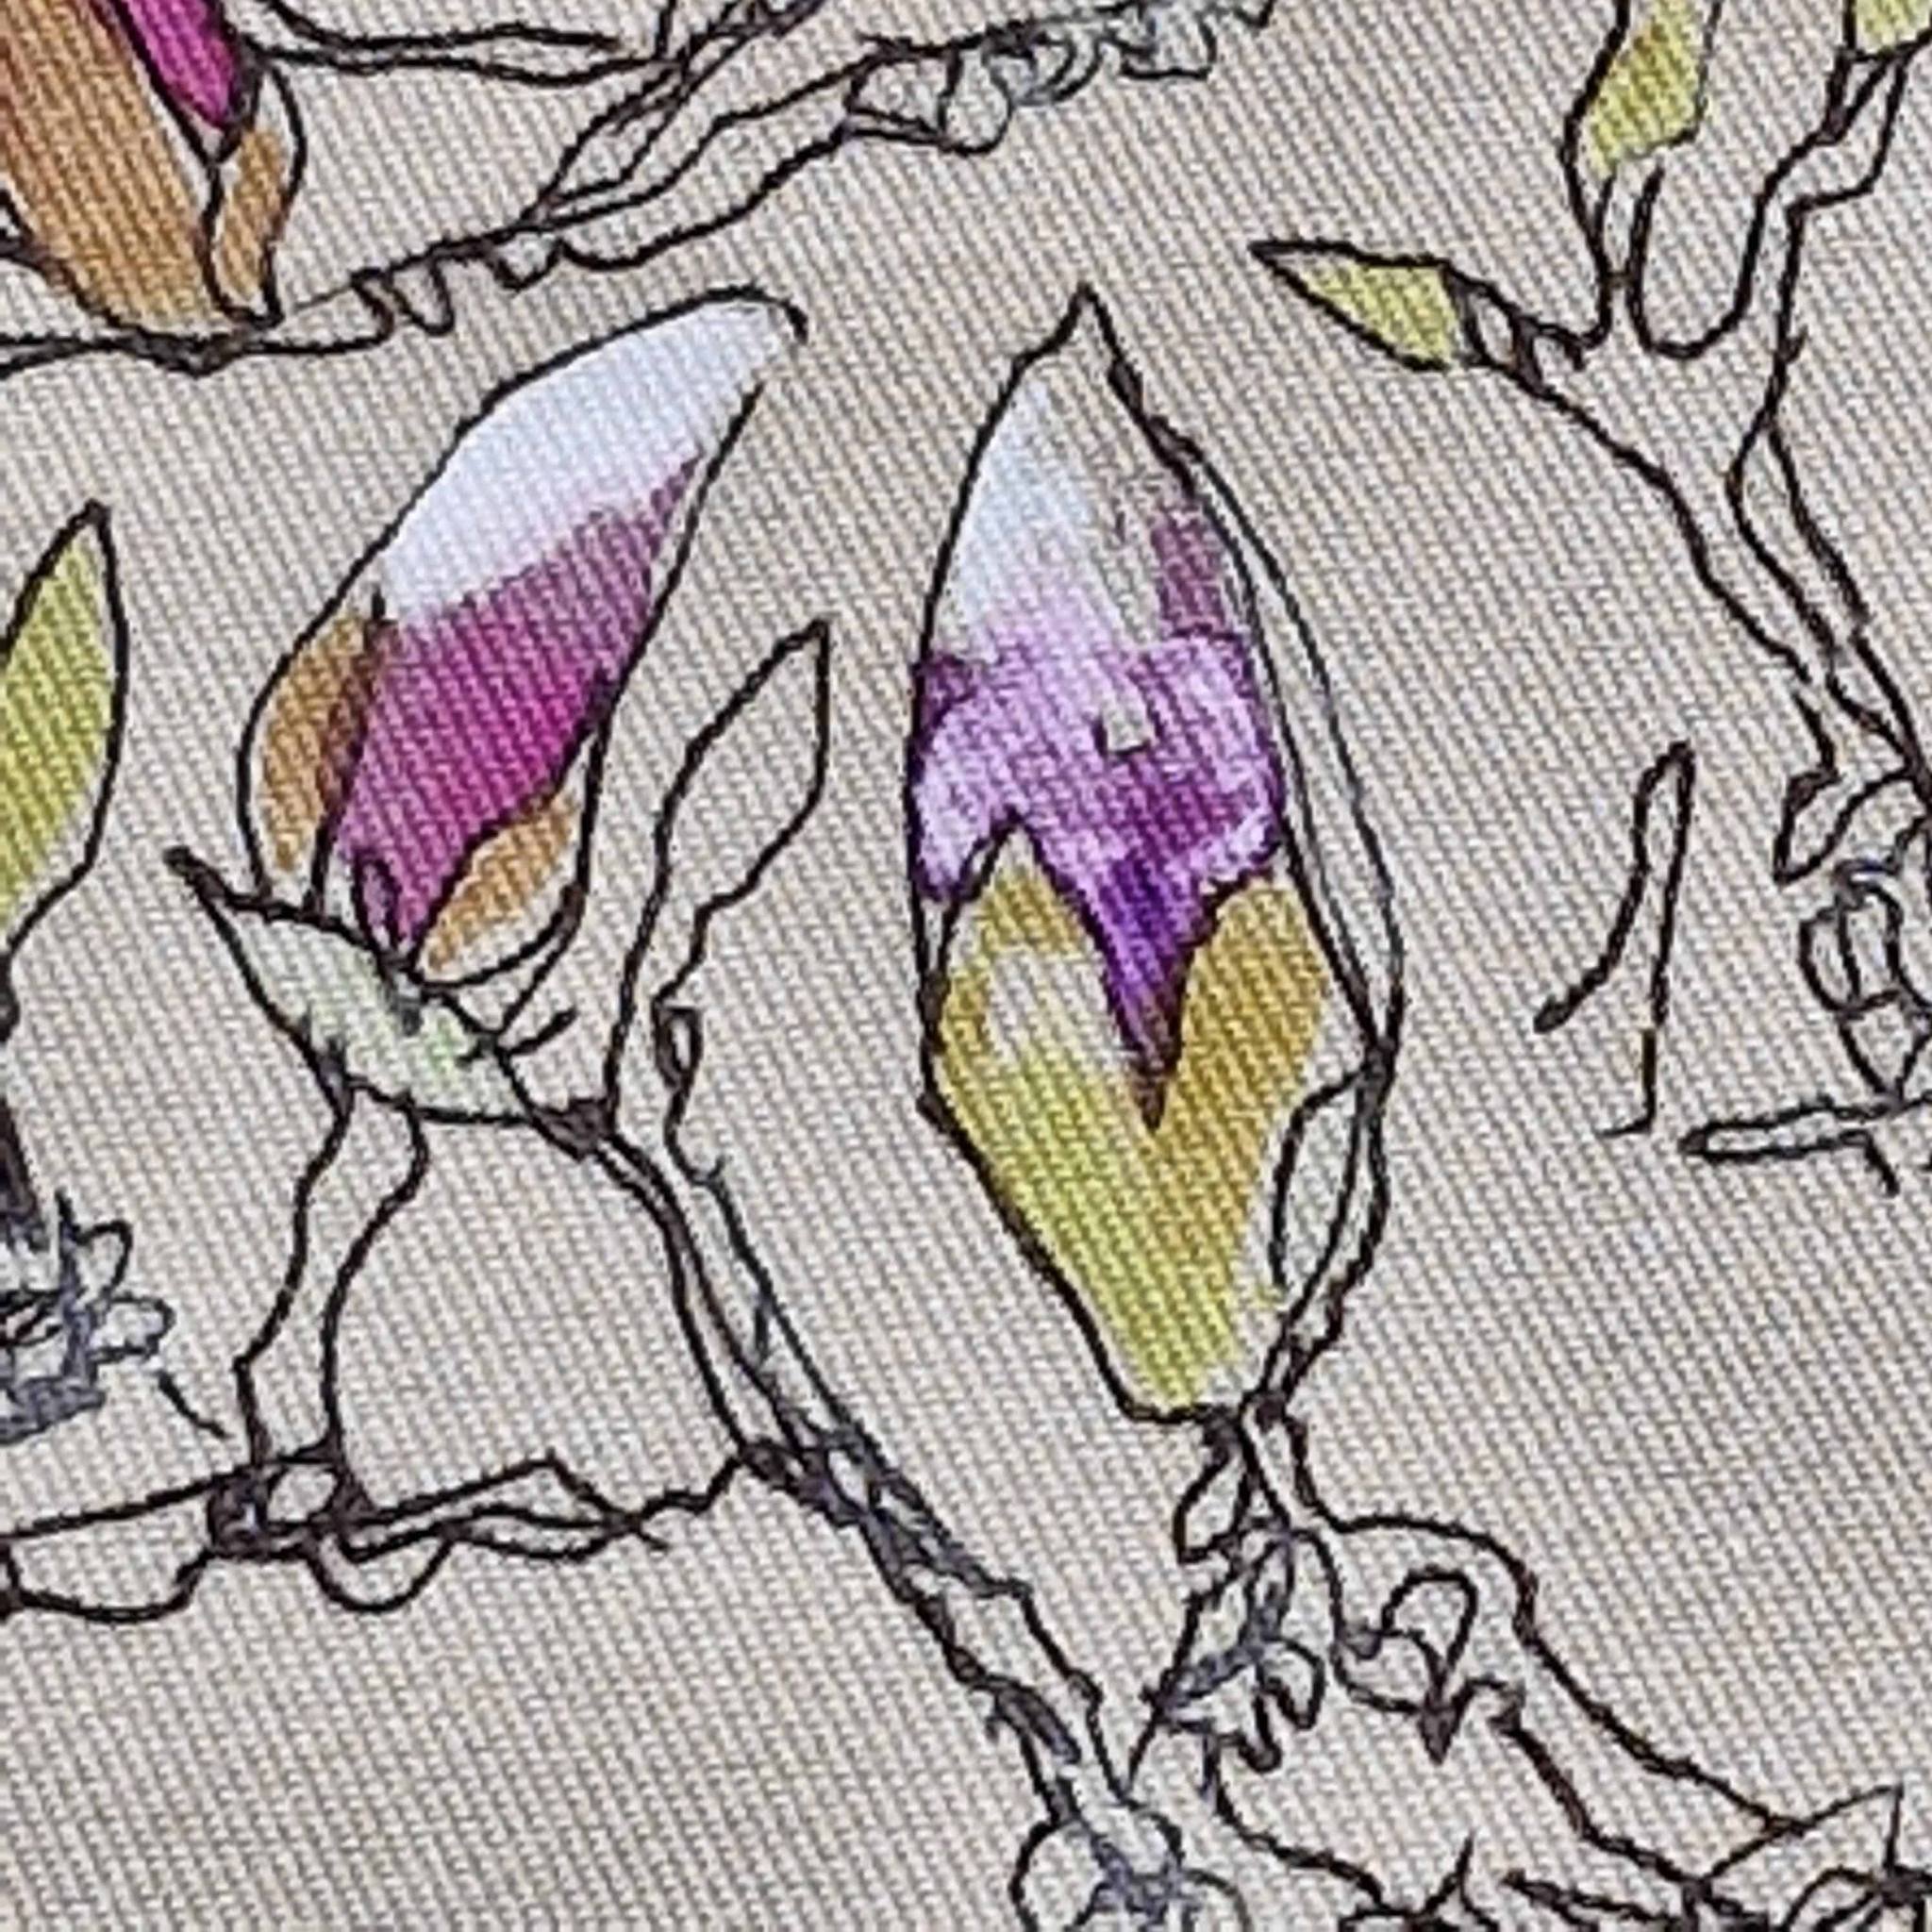 Magnolia Memory: Artist and product feature

Maggie Smith&rsquo;s beautifully vibrant drawing of the magnolia tree in her garden, available printed on a soft twill fabric. The 'Slow Blink' Magnolia table runner is developed from the original triptych